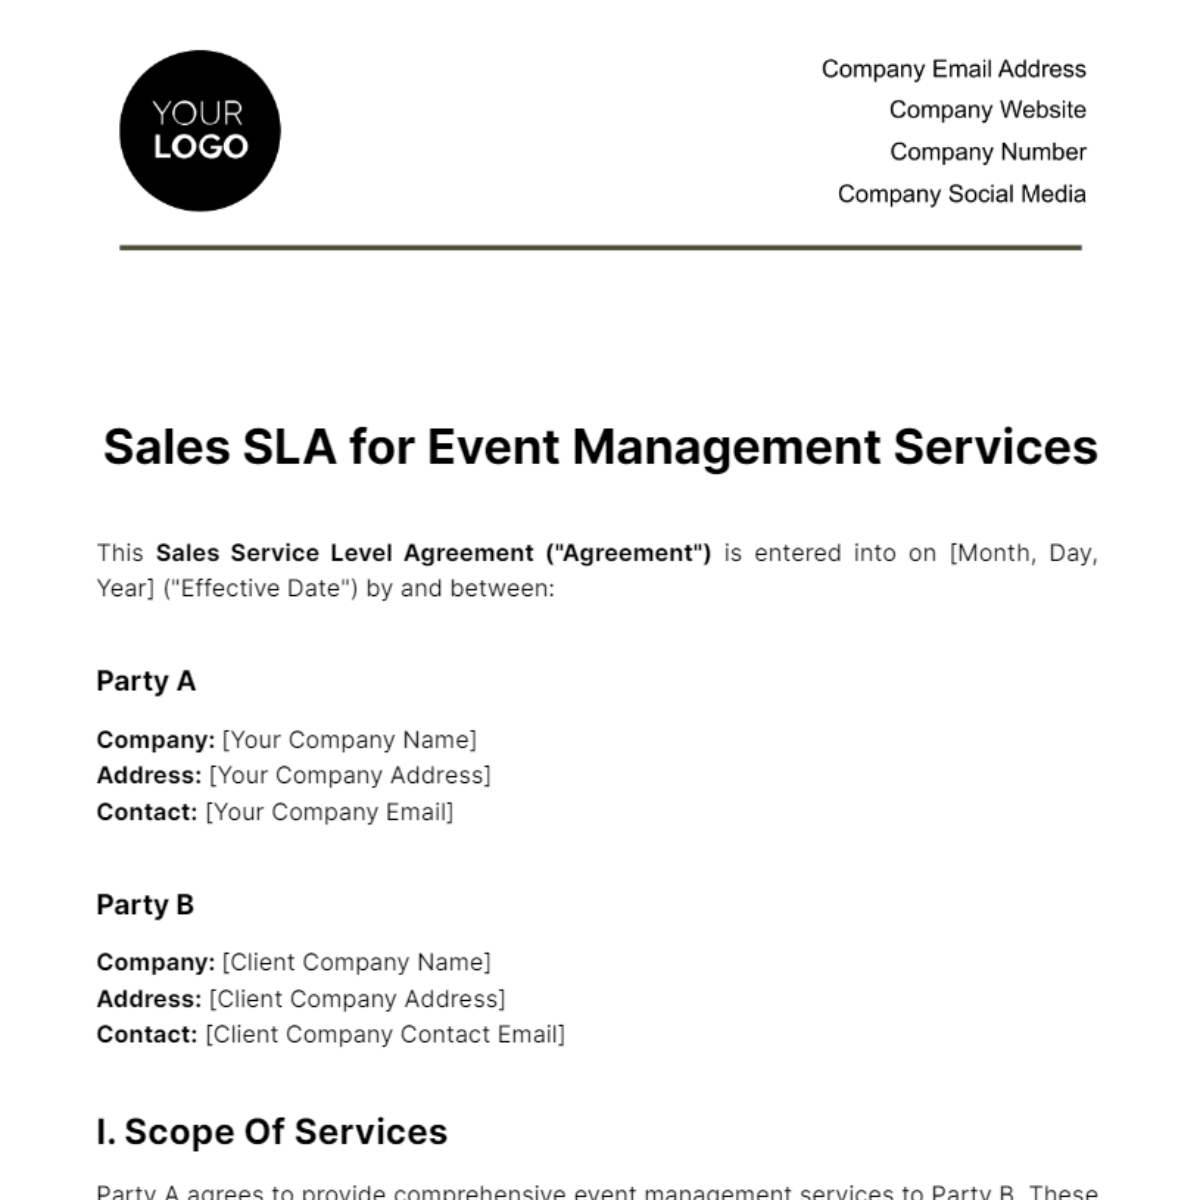 Free Sales SLA for Event Management Services Template